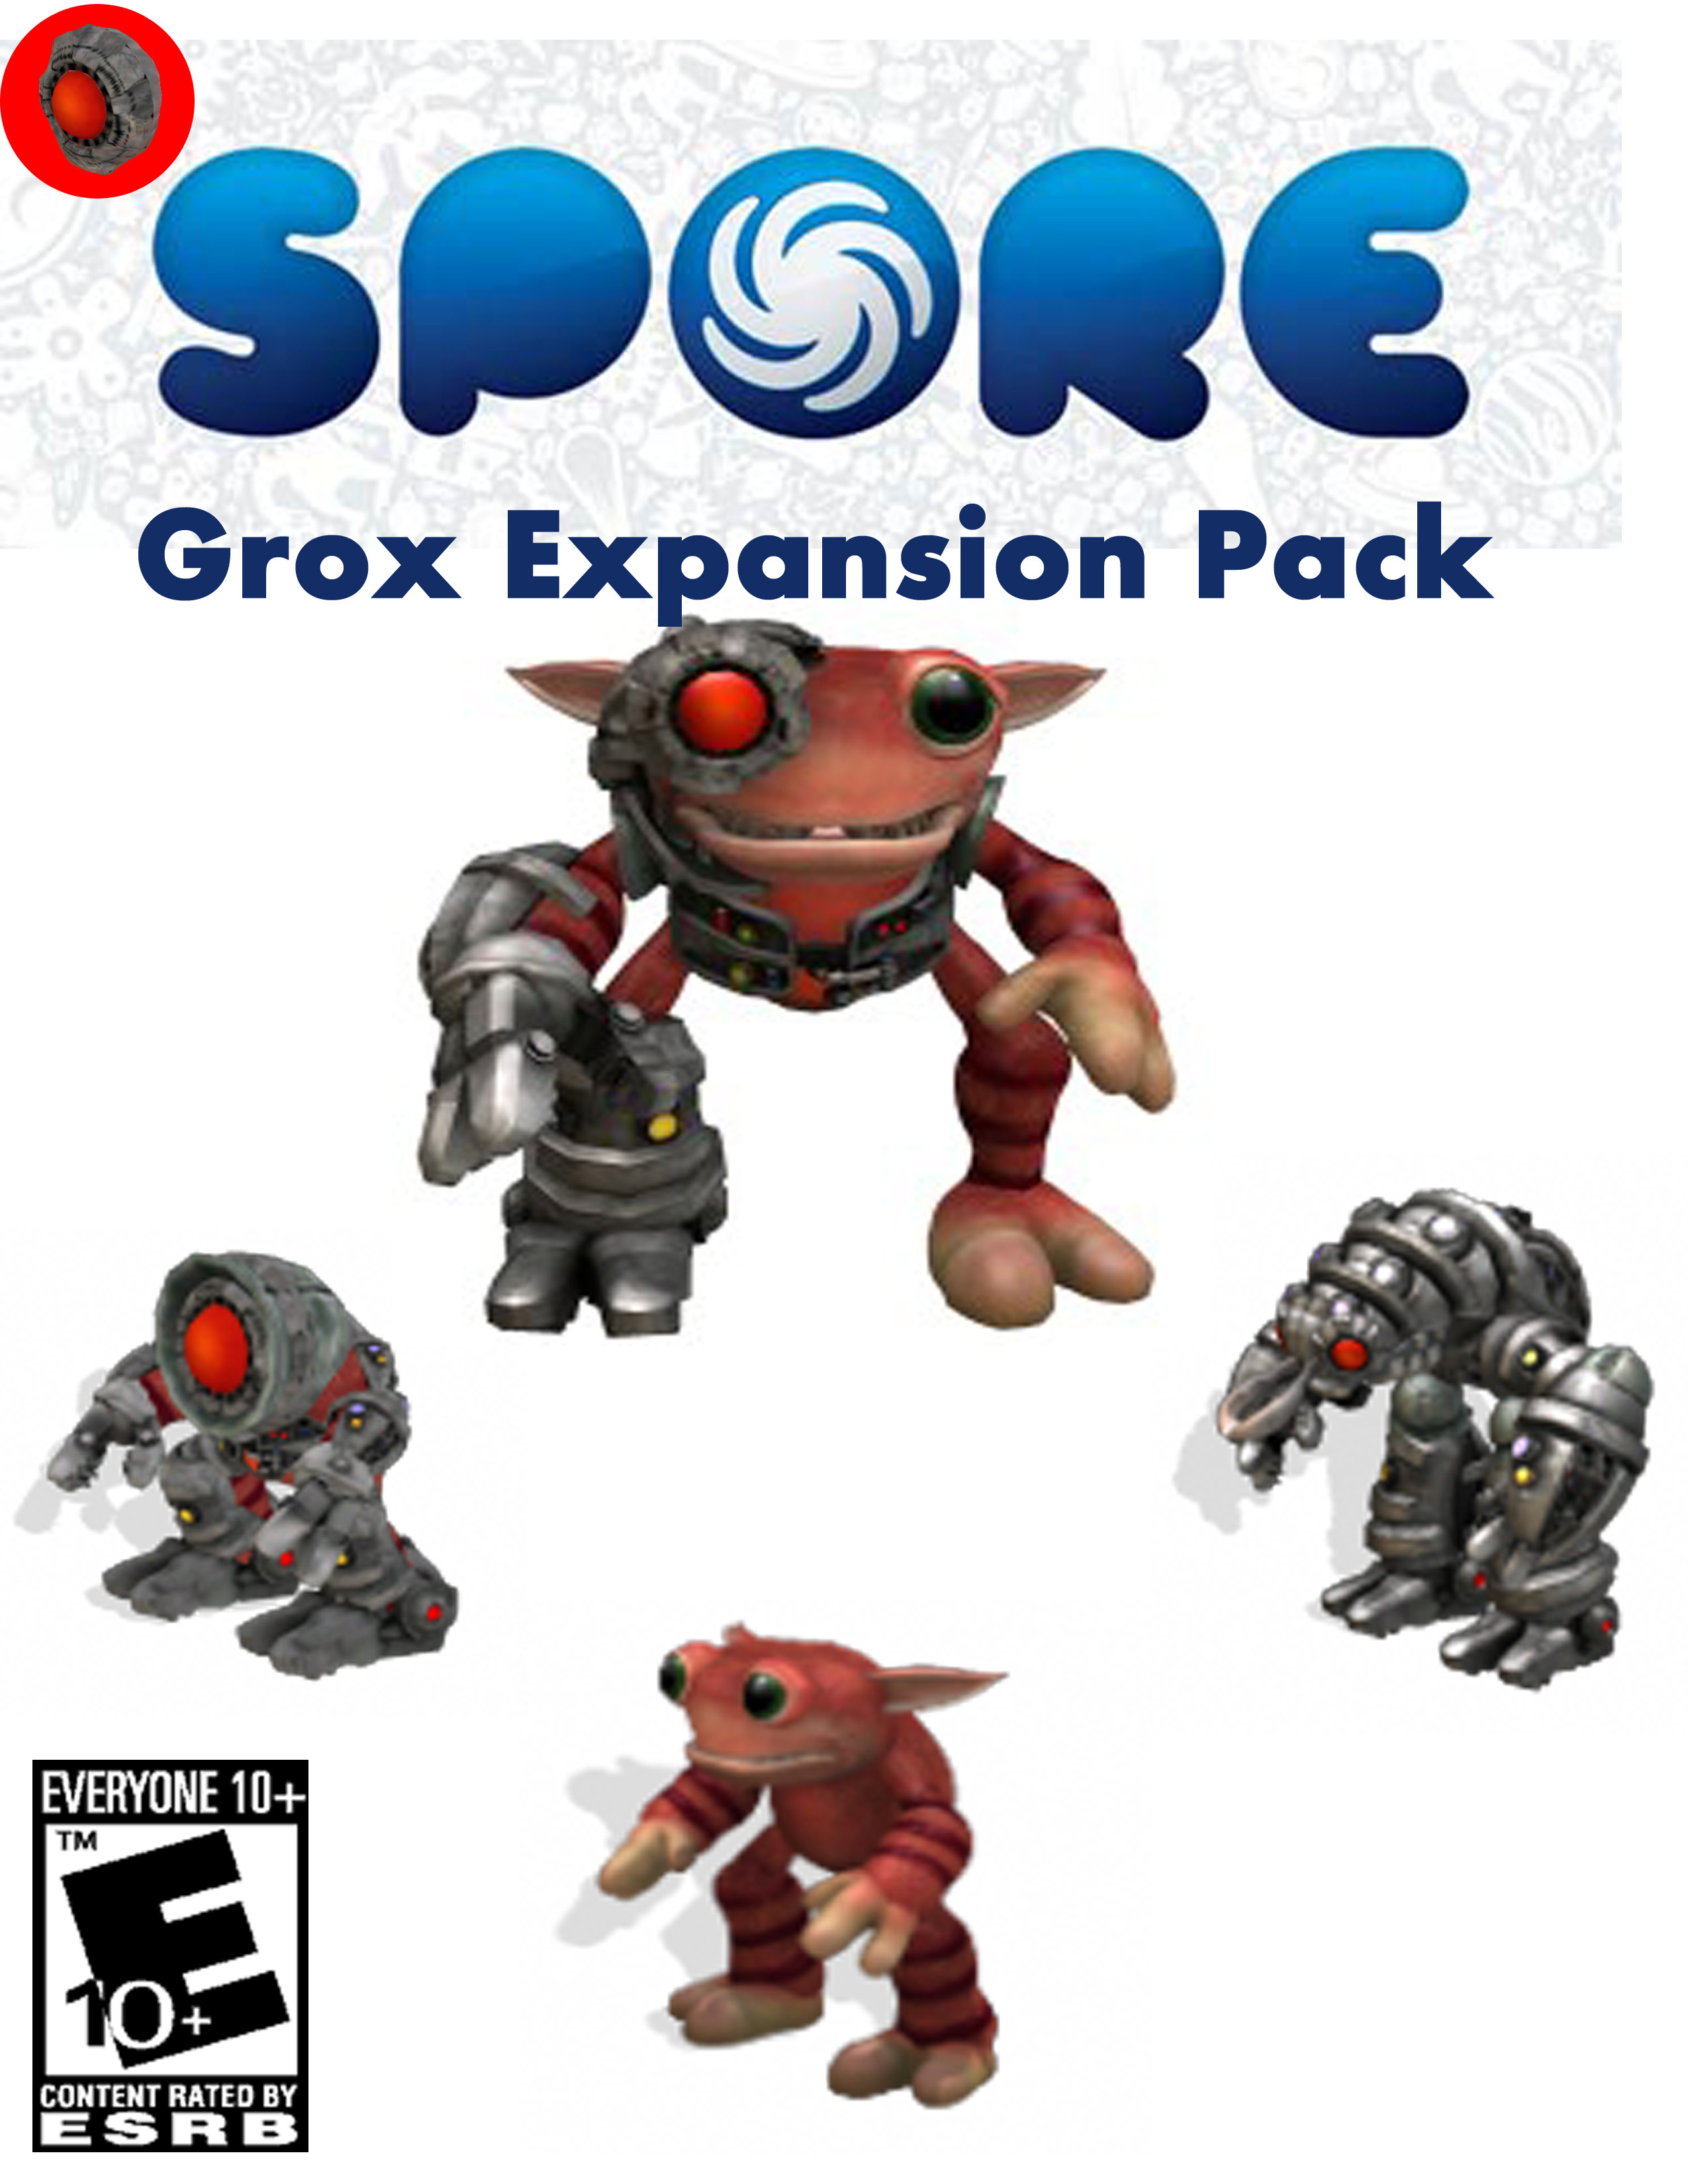 how to install spore epic play mod